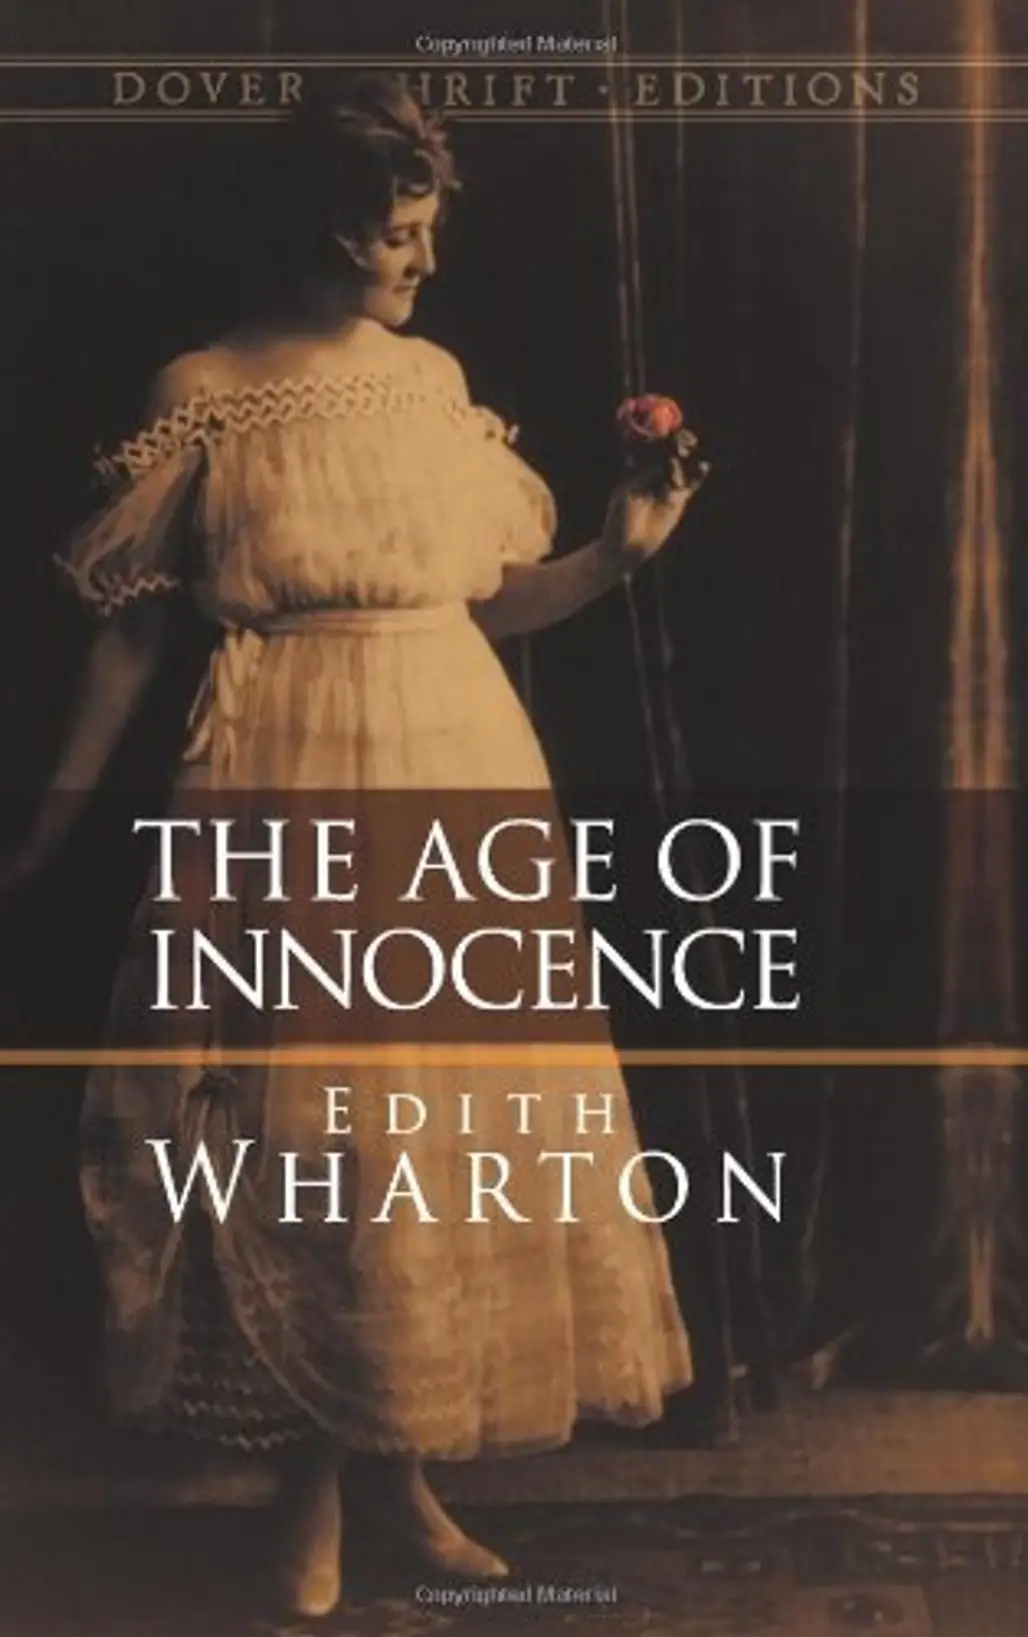 “the Age of Innocence”